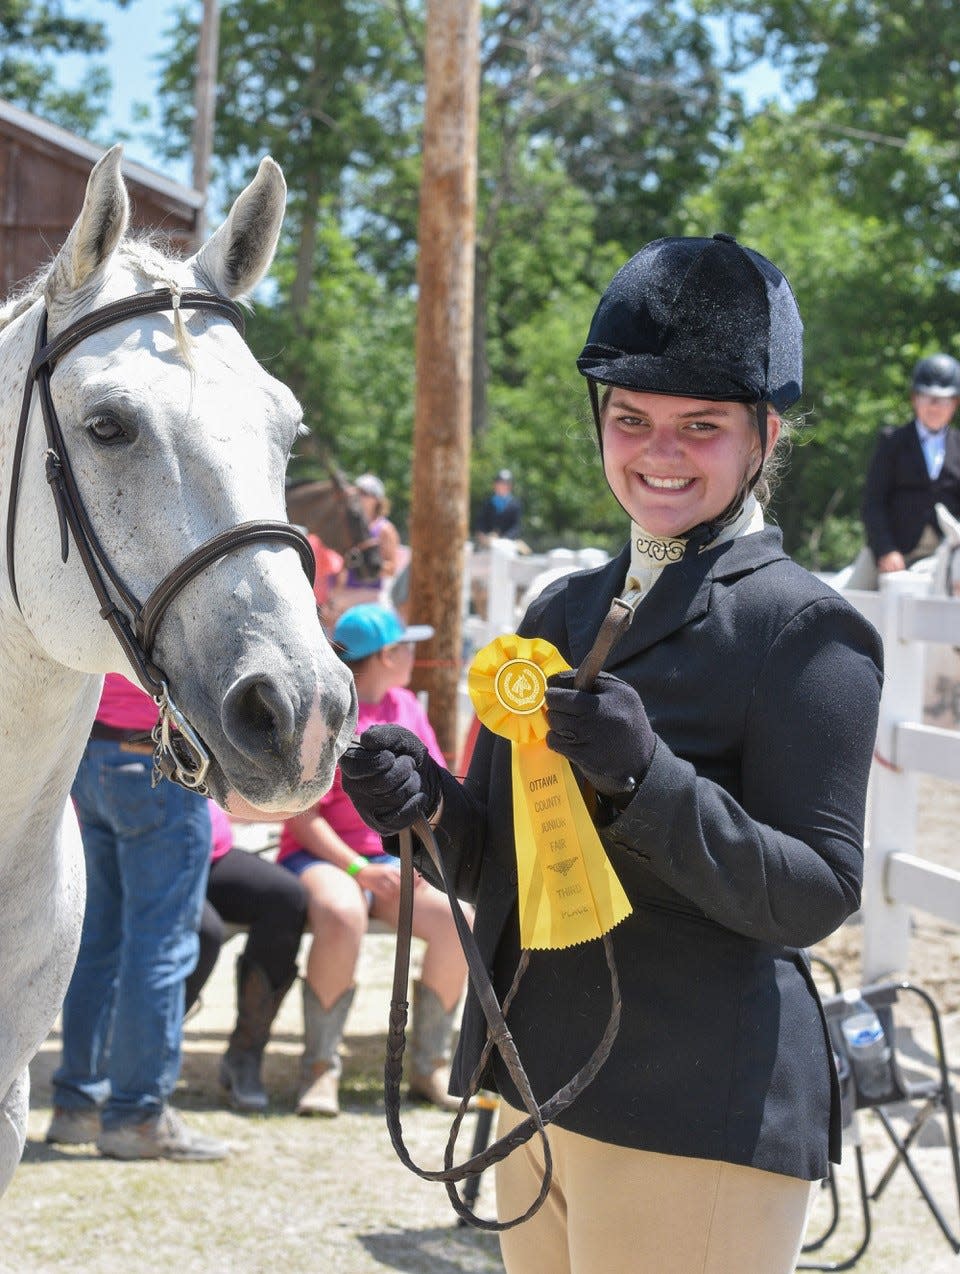 This was Reagan Mapes first time competing with her horse, Phoenix, since Phoenix was sidelined with an injury in 2021. Nevertheless, the pair took home a third place ribbon in English riding.